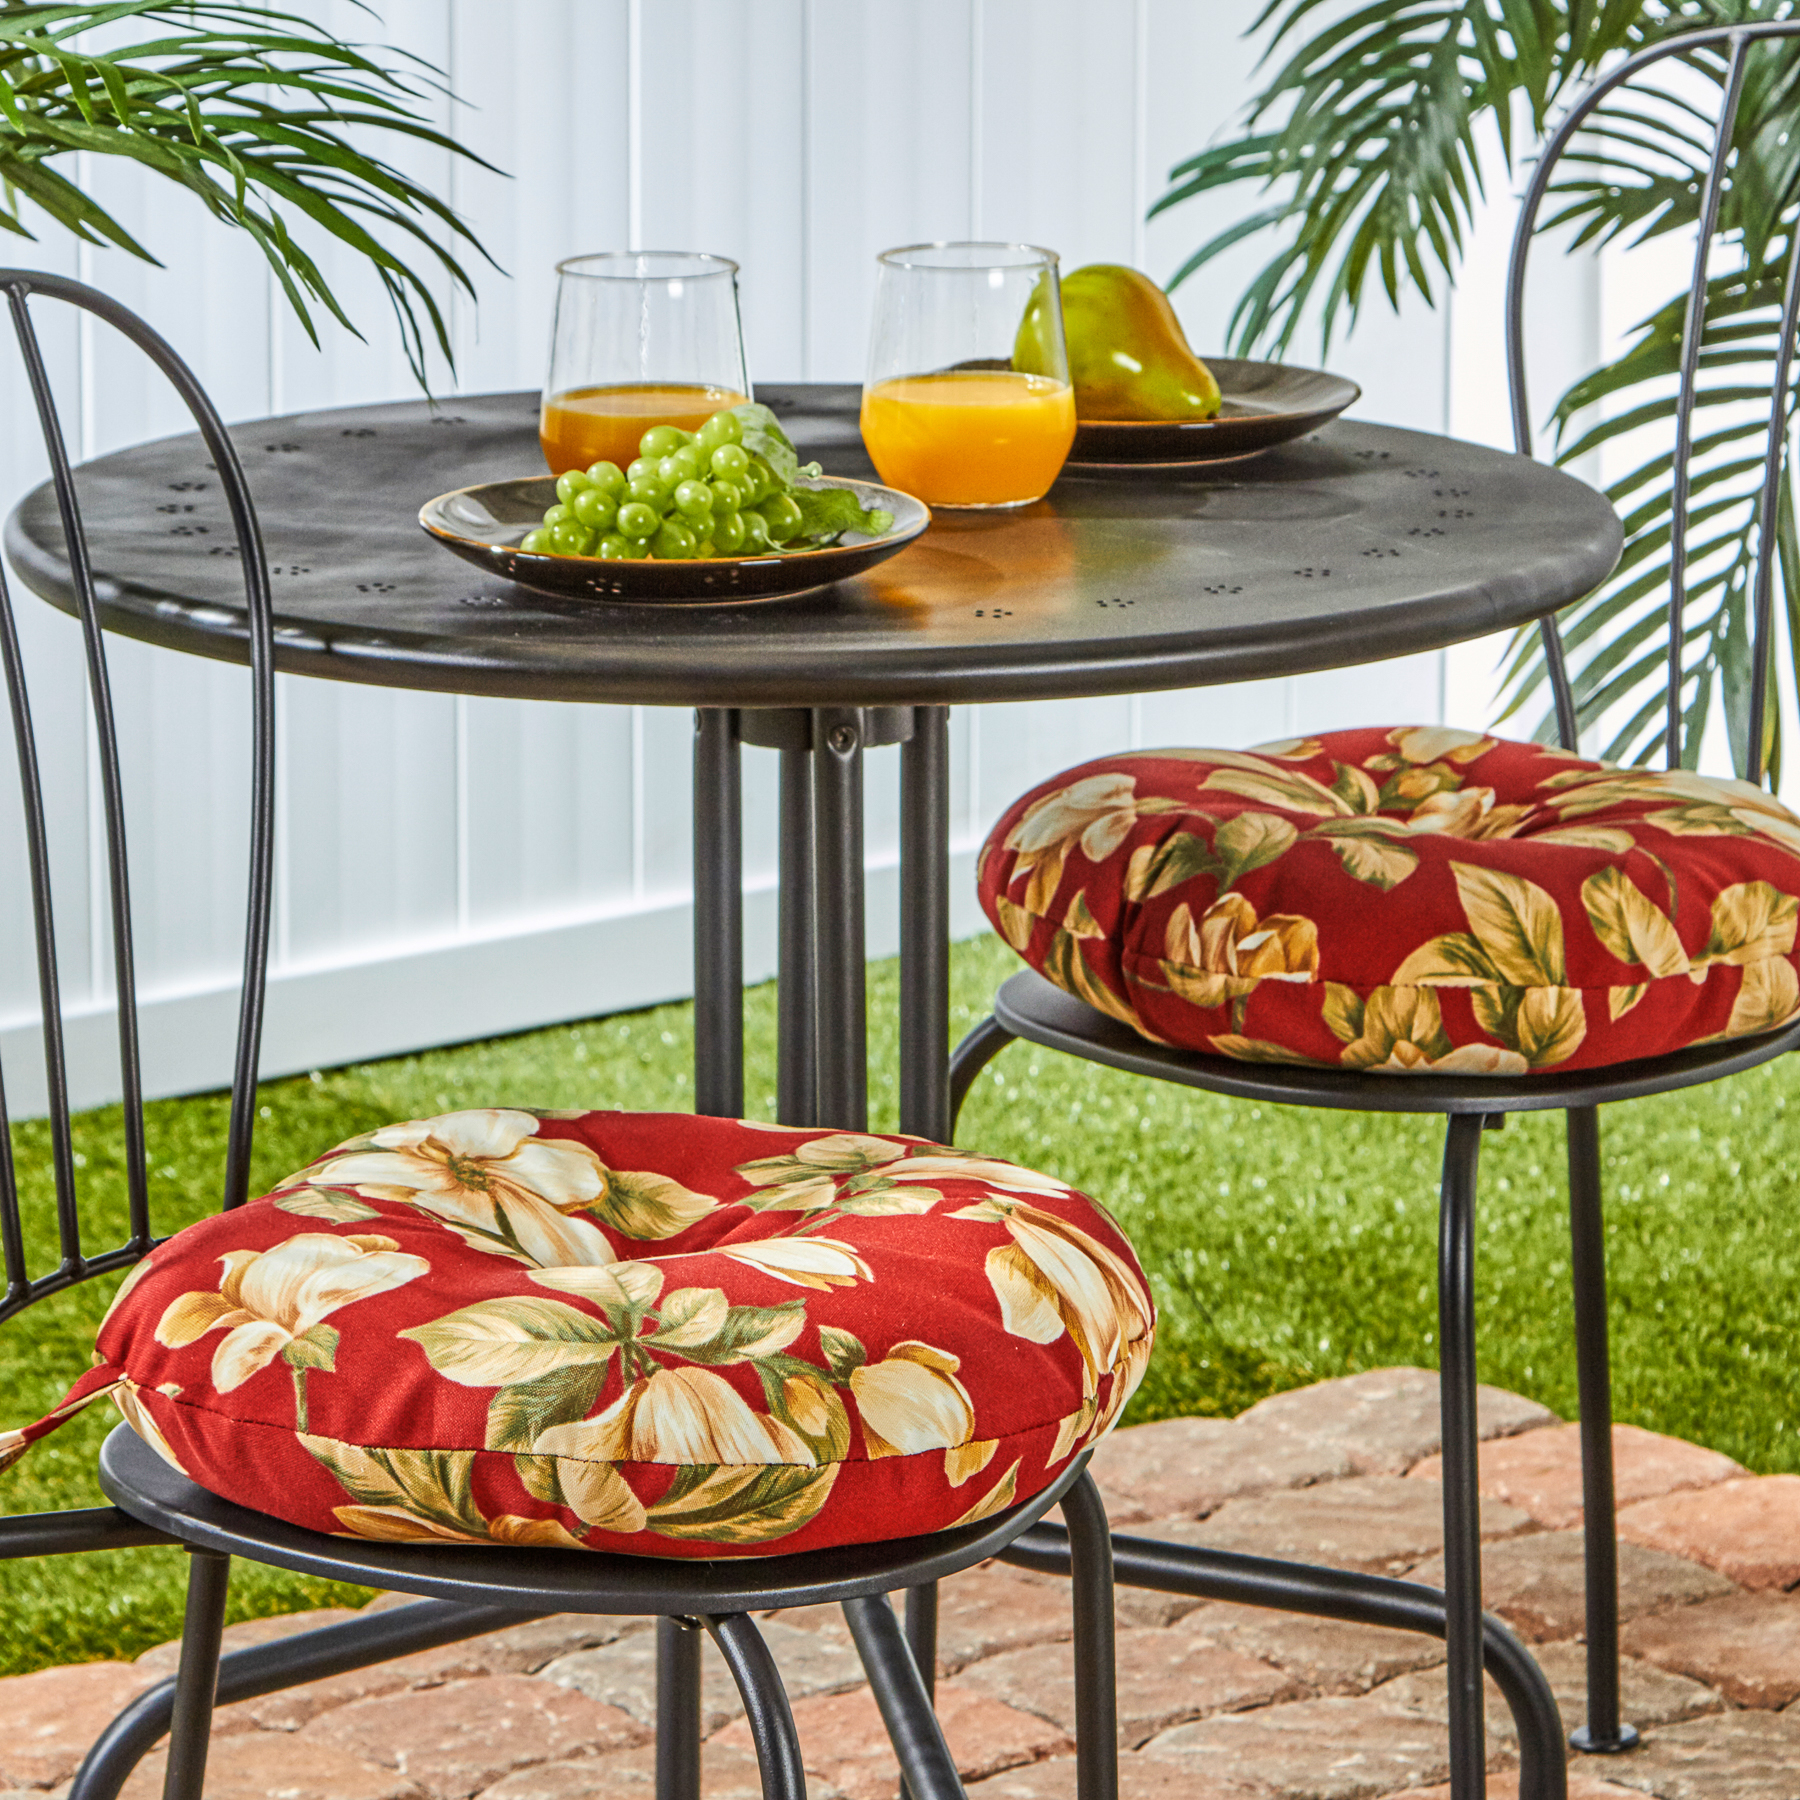 Greendale Home Fashions Roma Floral 15 in. Round Outdoor Reversible Bistro Seat Cushion (Set of 2) - image 3 of 7